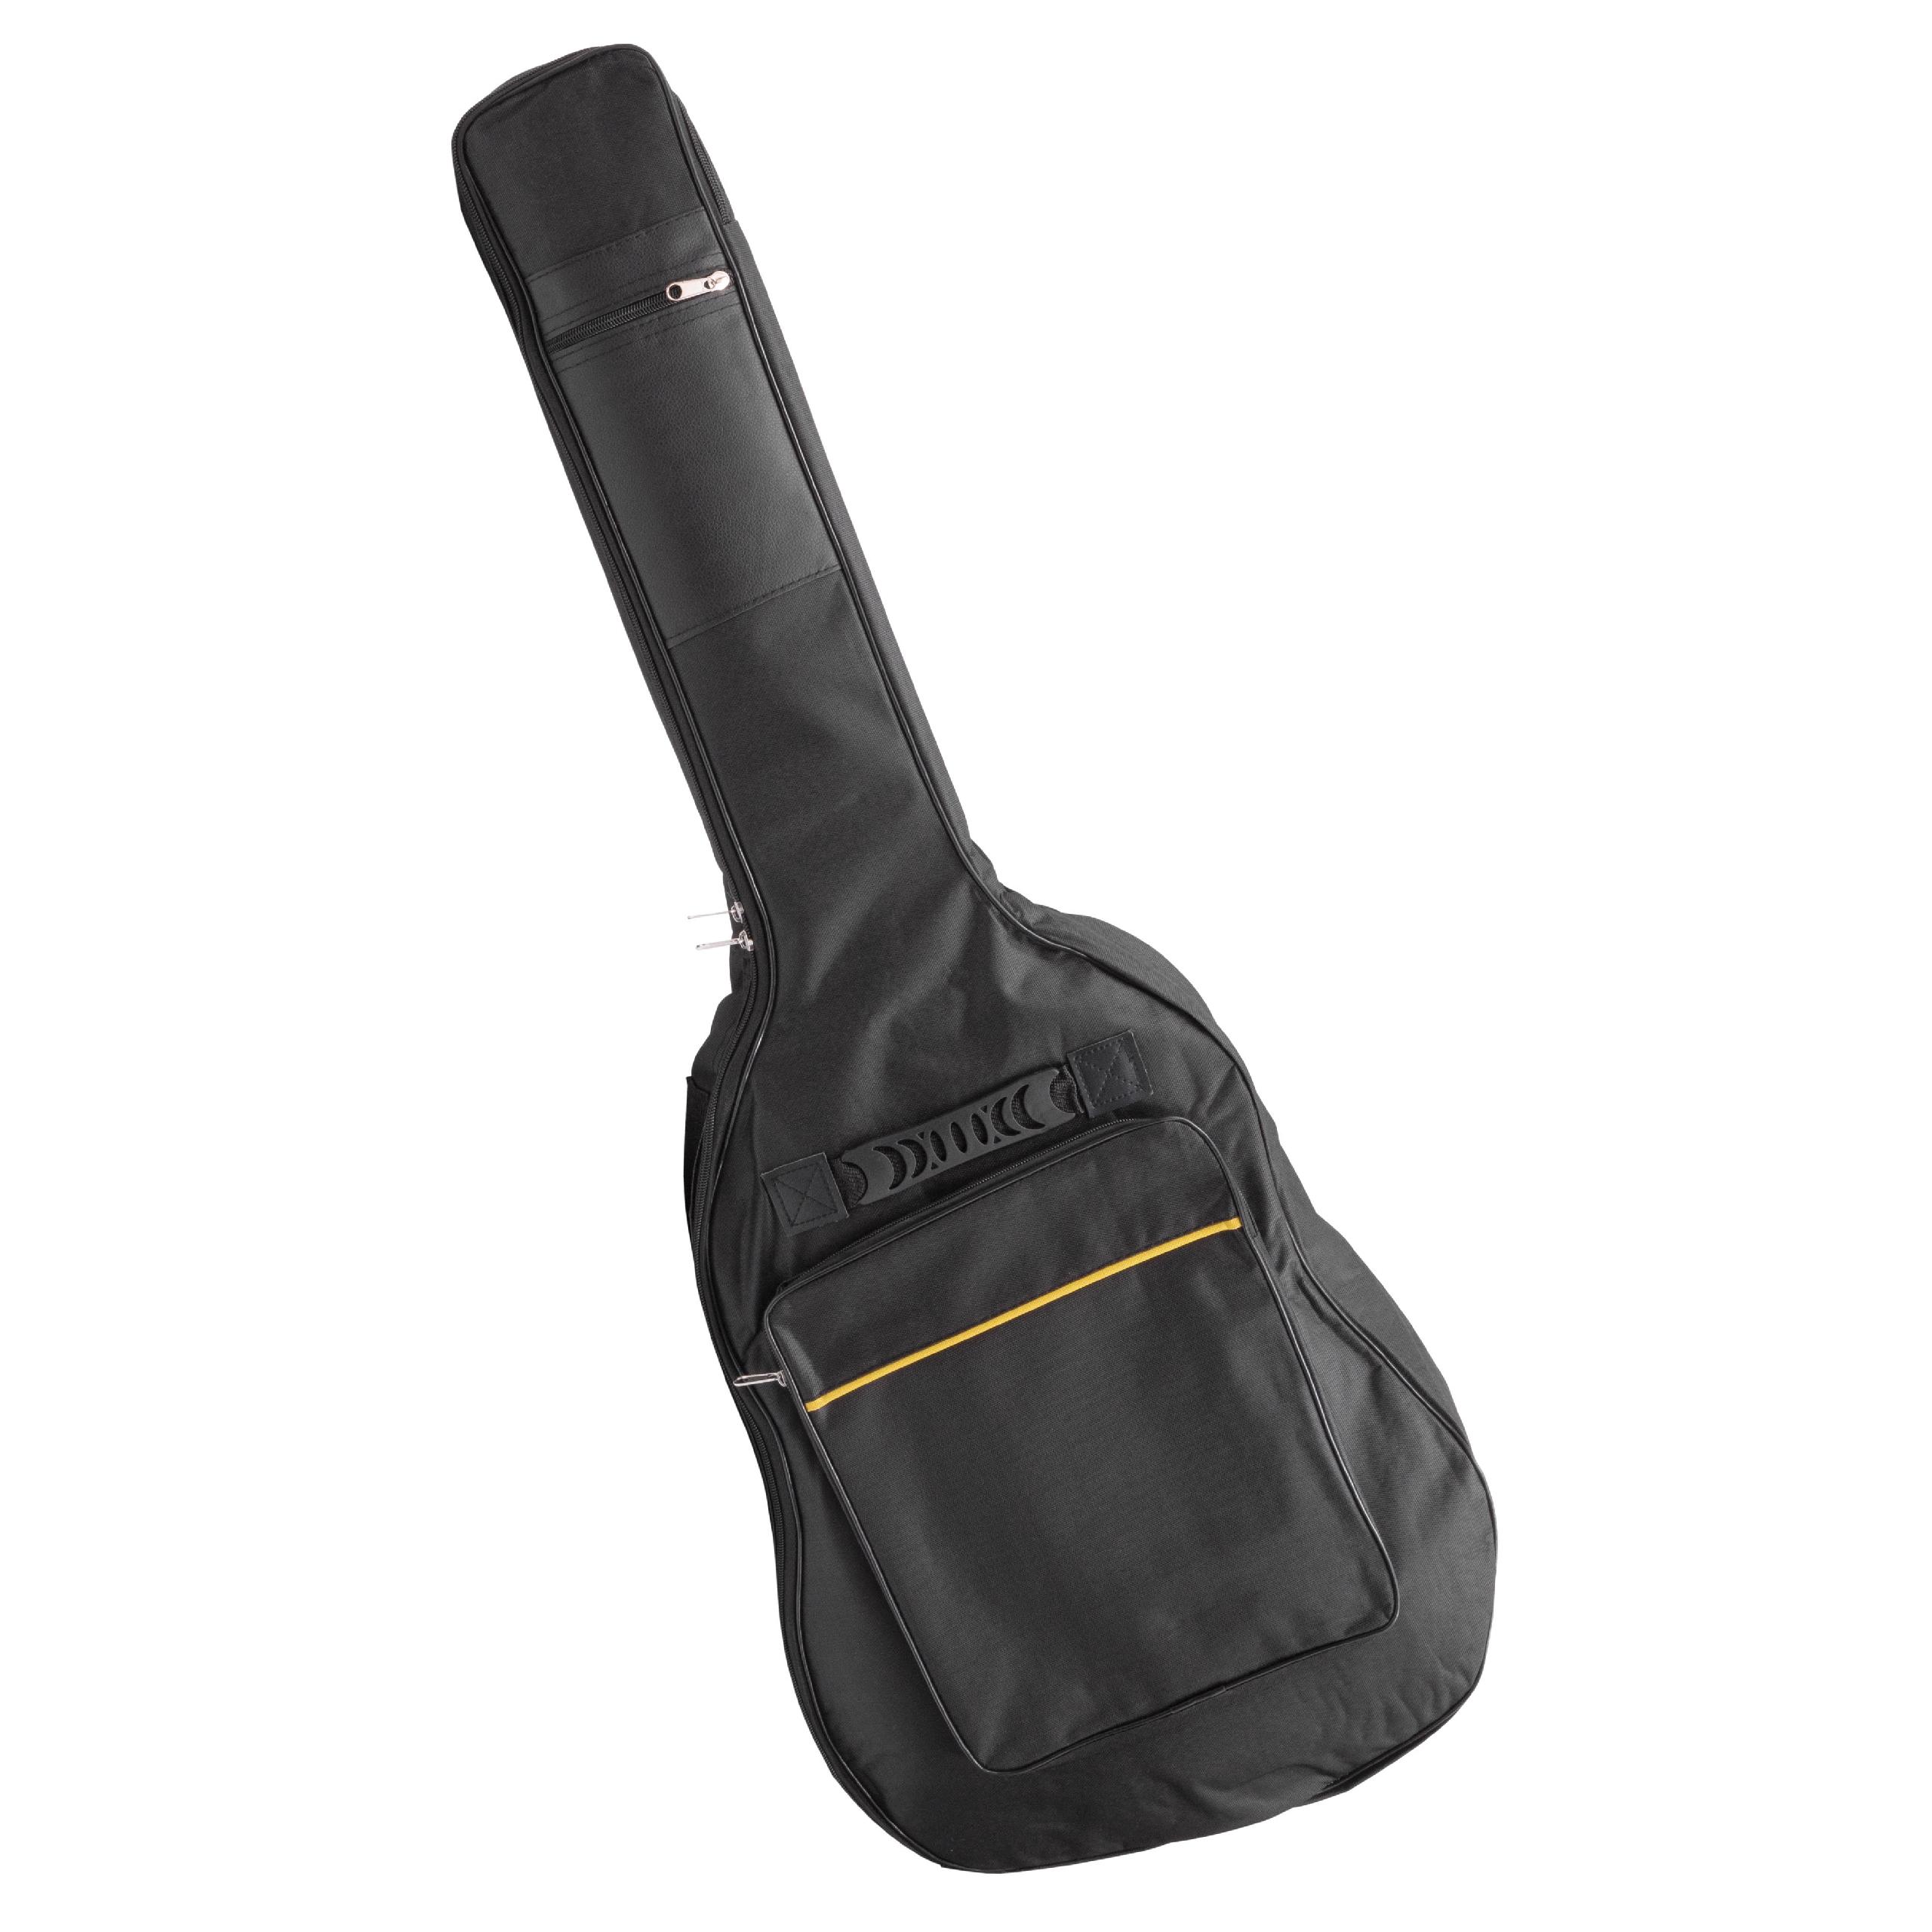 vhbw Guitar Case Gig Bag Backpack for Electric Guitar e.g. compatible with Ibanez, Yahamaha - Padded, Ergonomi